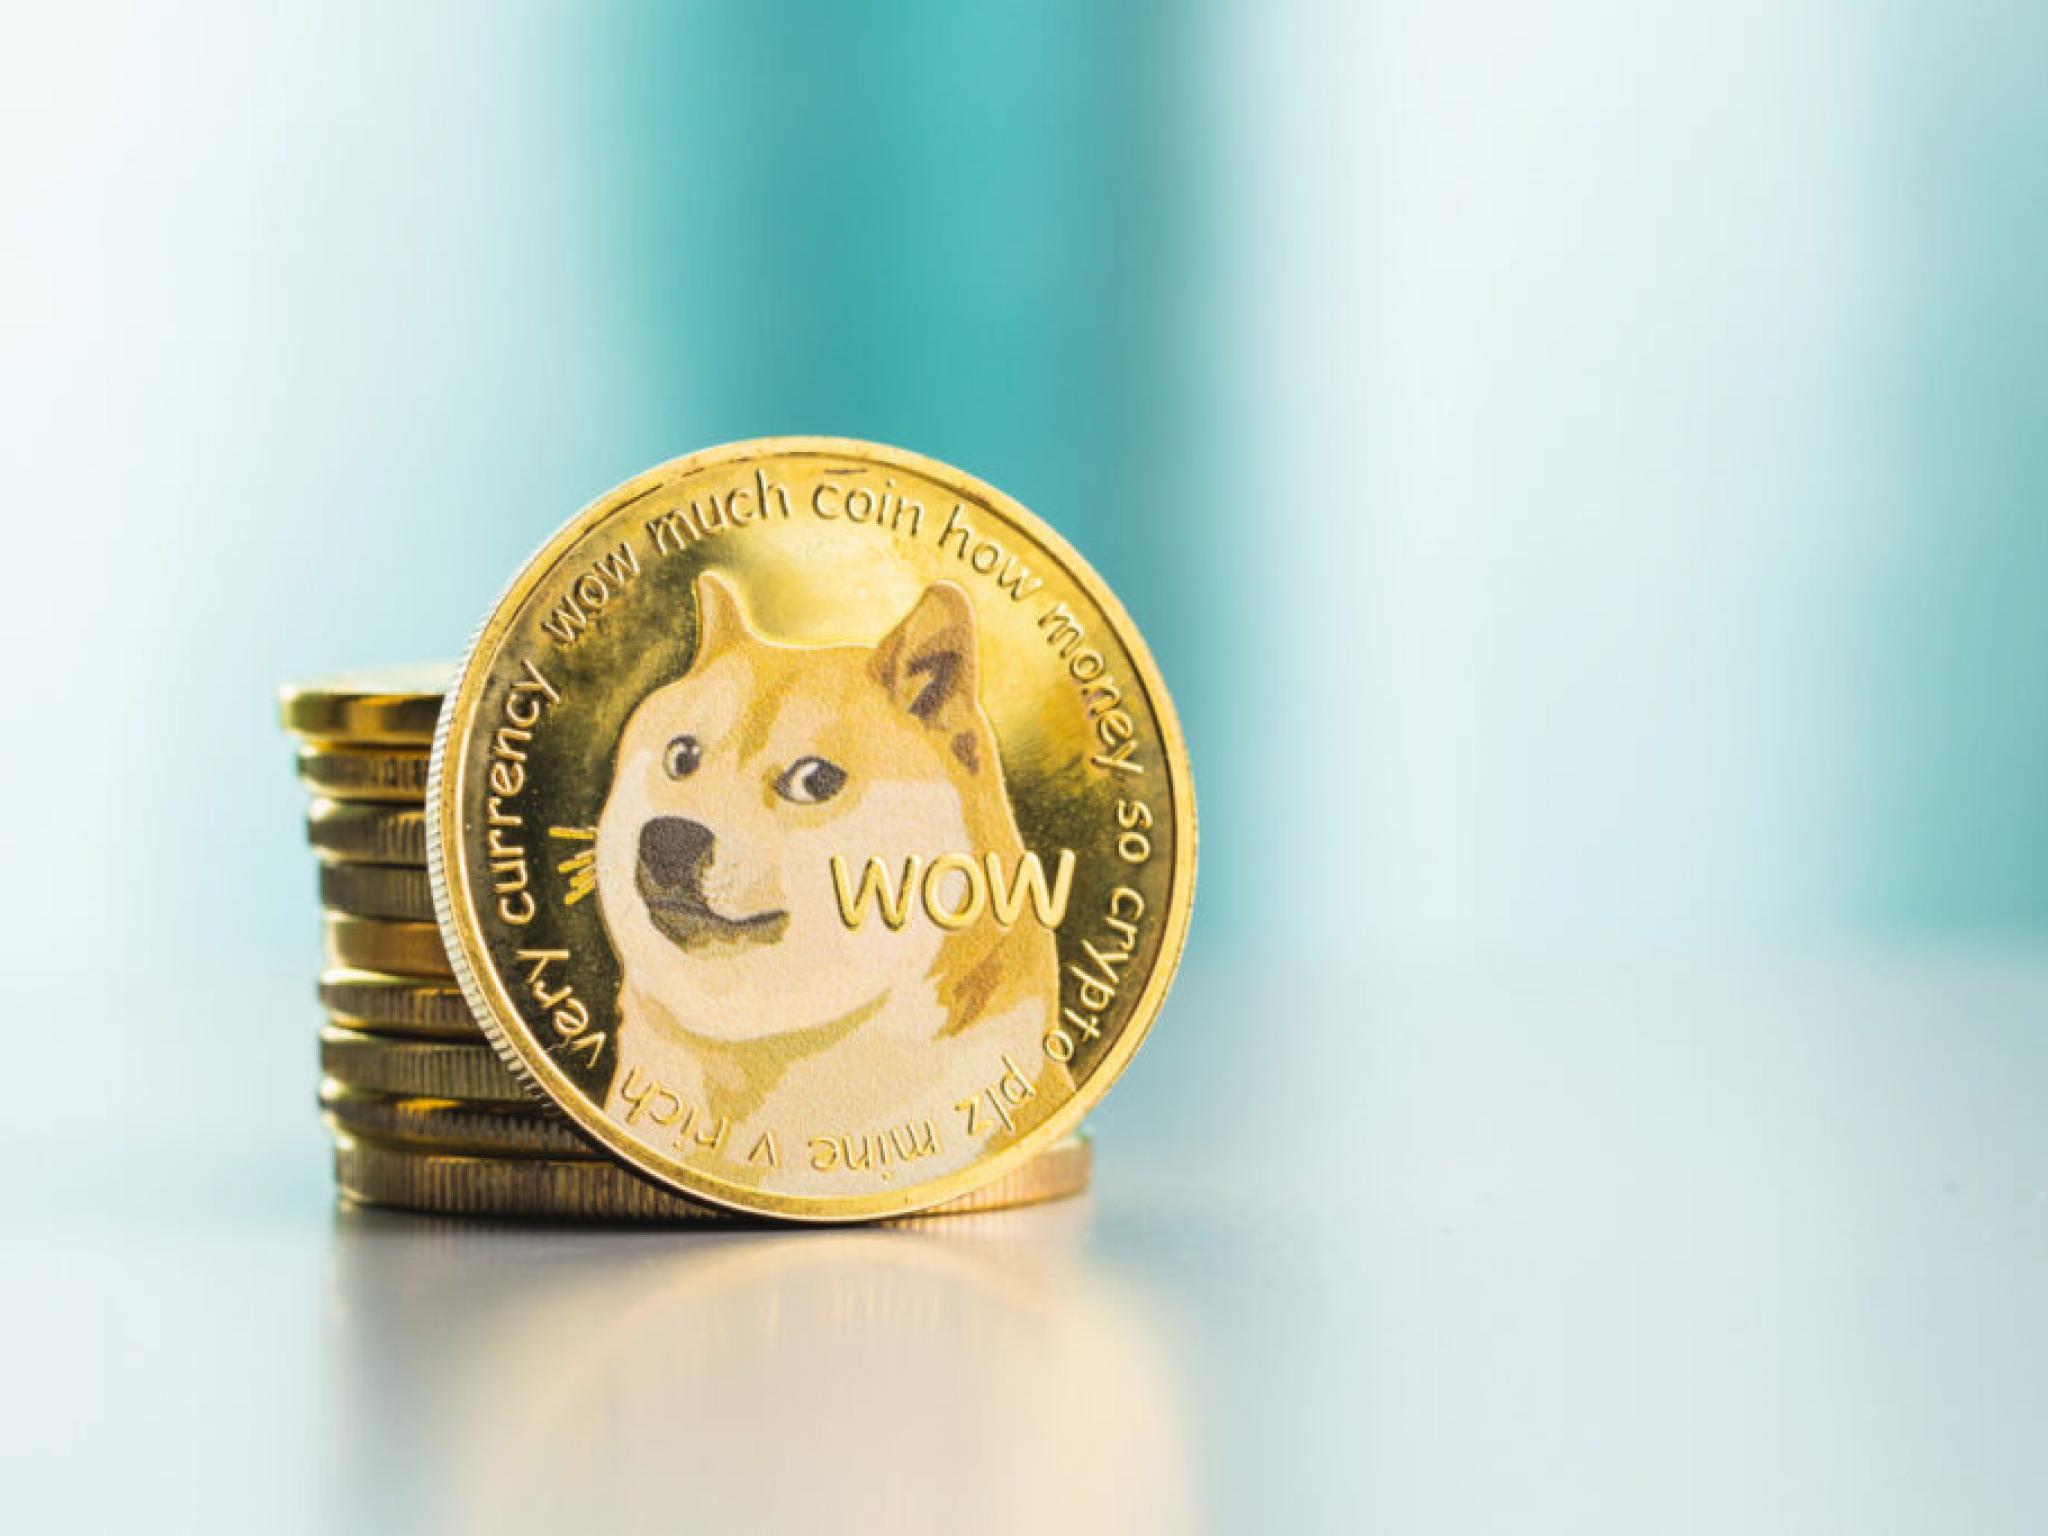  doge-is-the-first-crypto-gme-folks-are-likely-to-buy-touts-trader-that-turned-5-figures-into-8-figures-with-meme-coins 